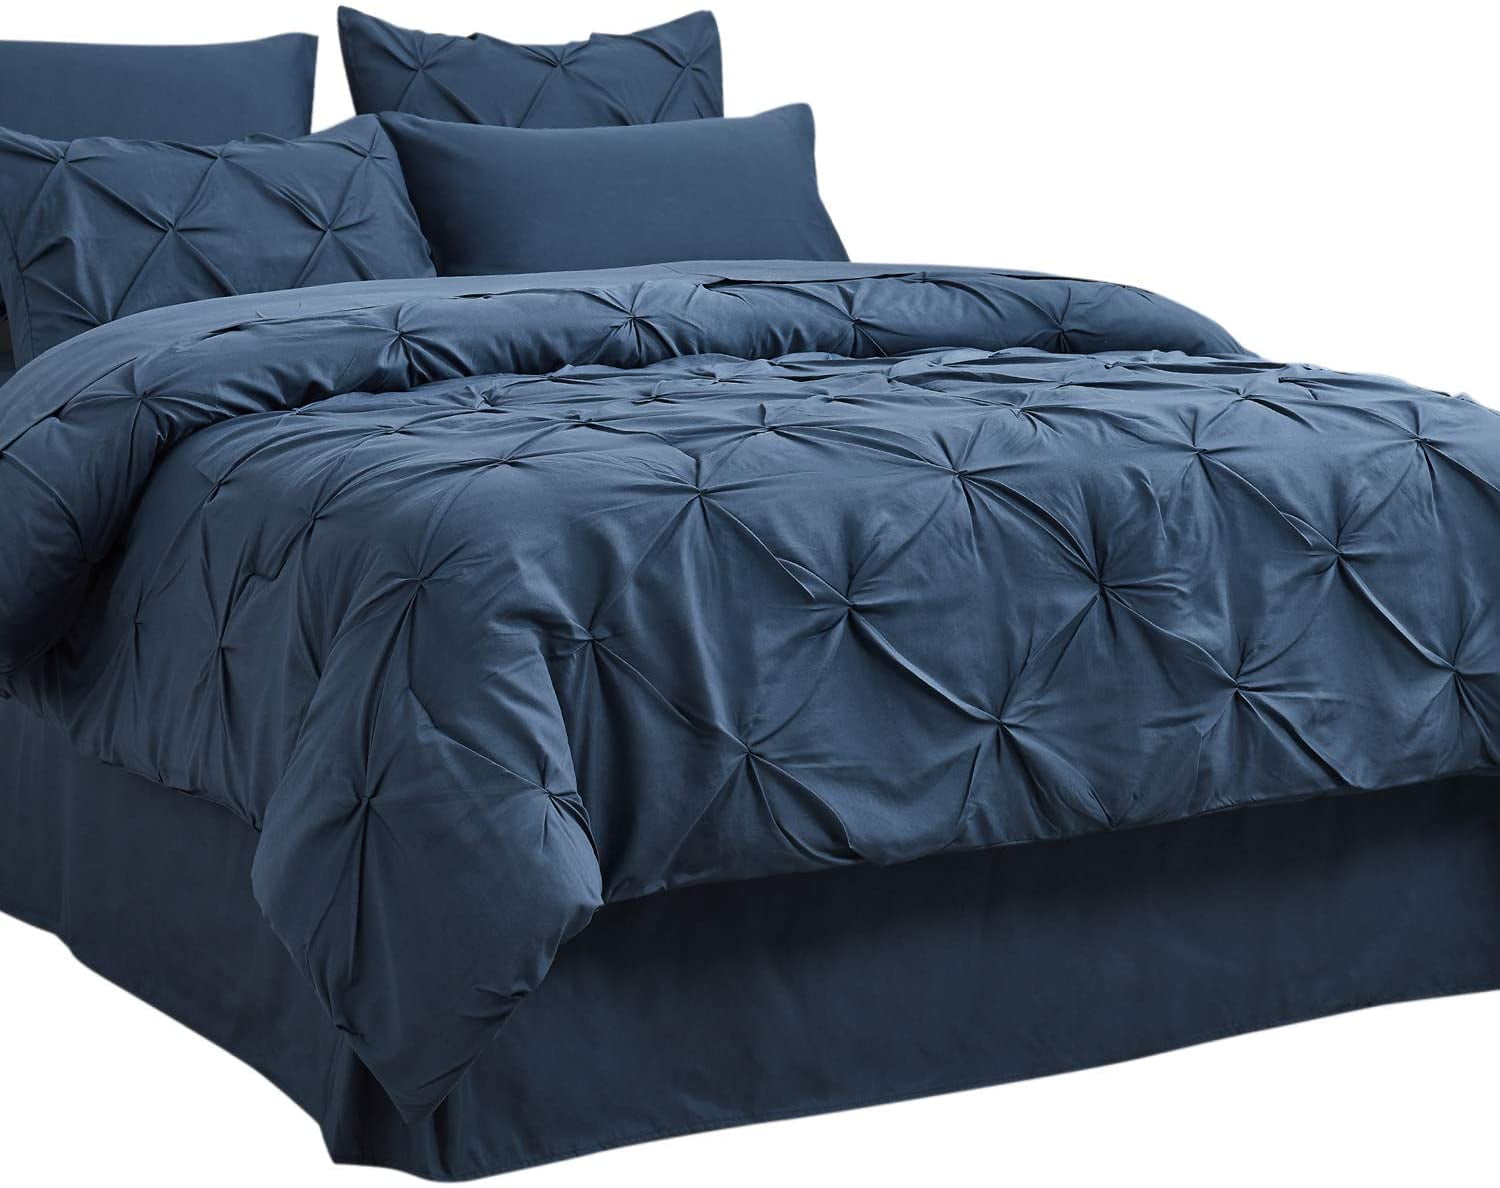 Details about   Wake In Cloud Dark Gray Comforter Set 100% Cotton Fabric with Soft Microfiber 